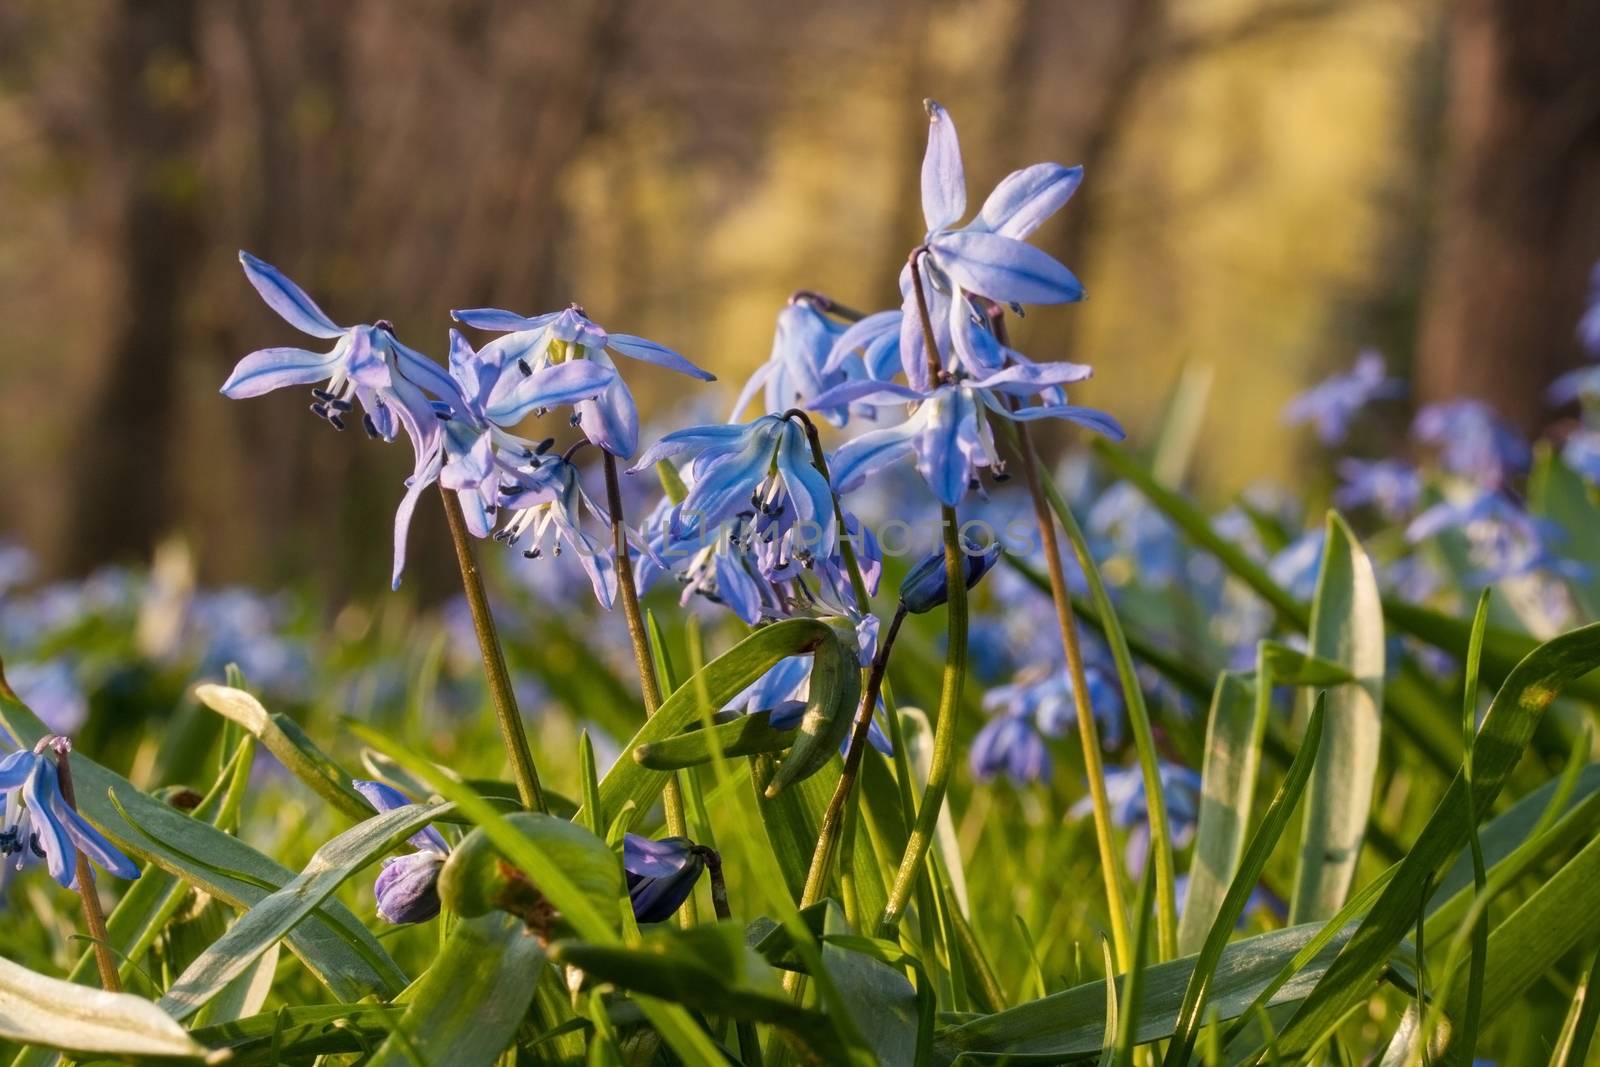 Blue Siberian squill flowers blooming in spring, with trees in the background